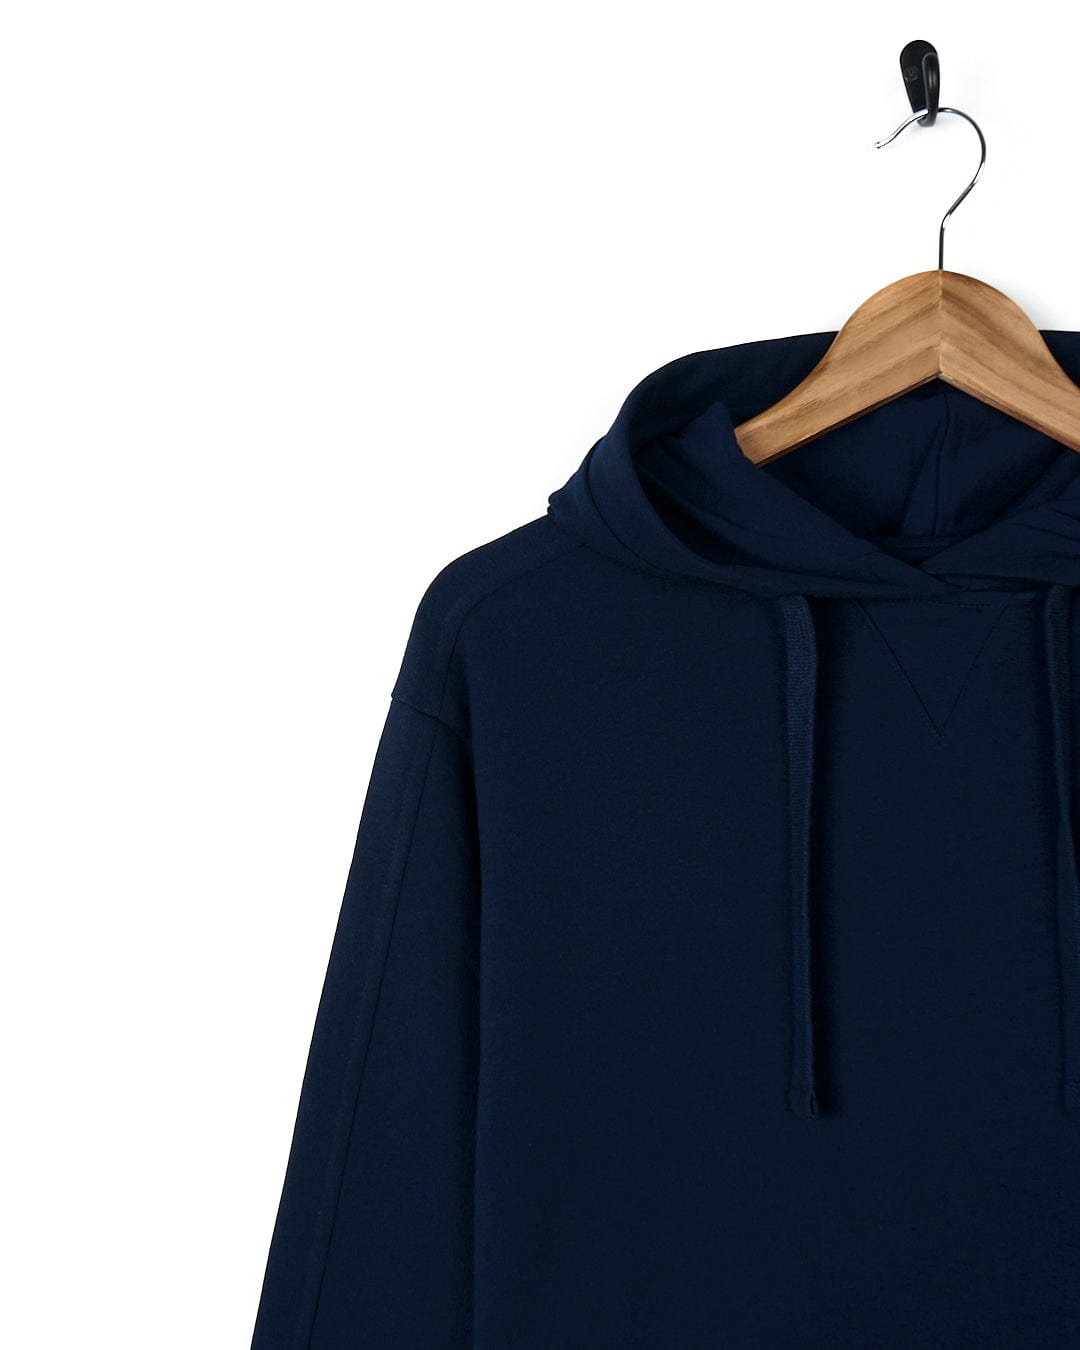 A stylish Saltrock Elsa - Womens Hooded Sweat Dress - Dark Blue hanging on a hanger, offering both comfort and style.